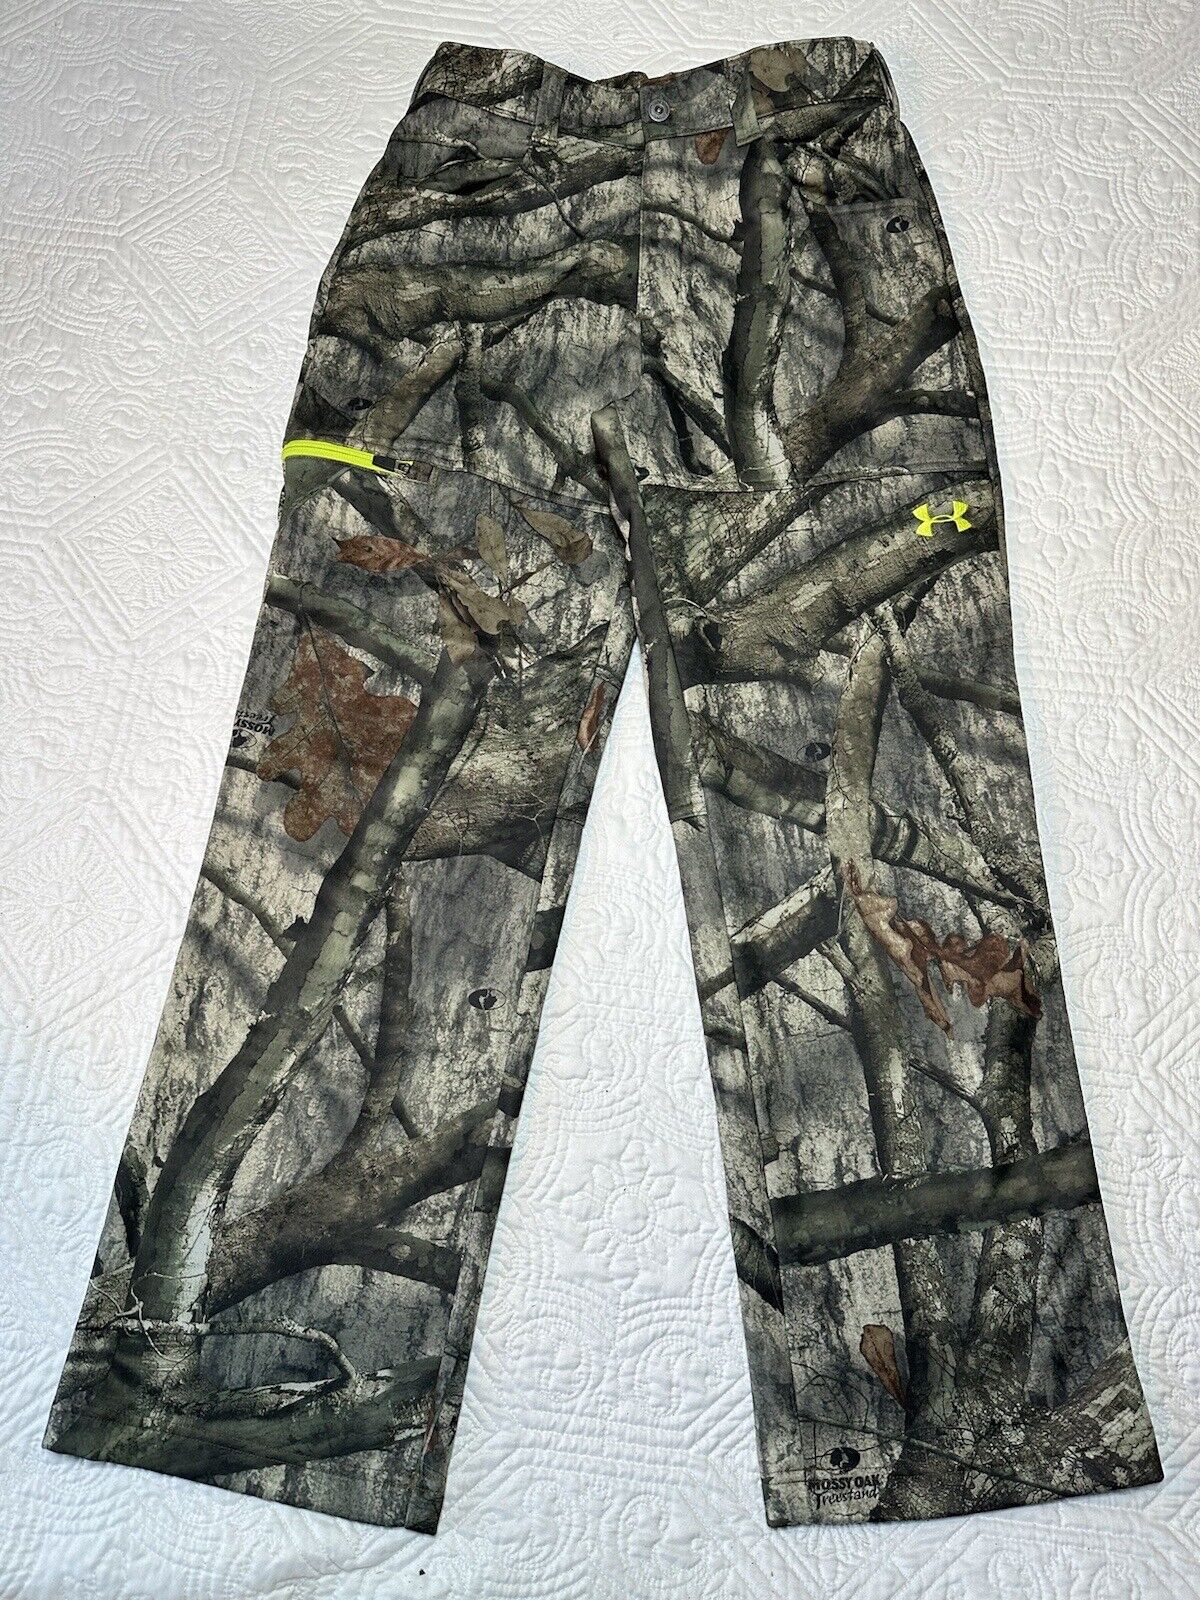 Under Armour Mossy Oak Tree Stand Camo Fleece Lined Zip Cargo Pants Size Large